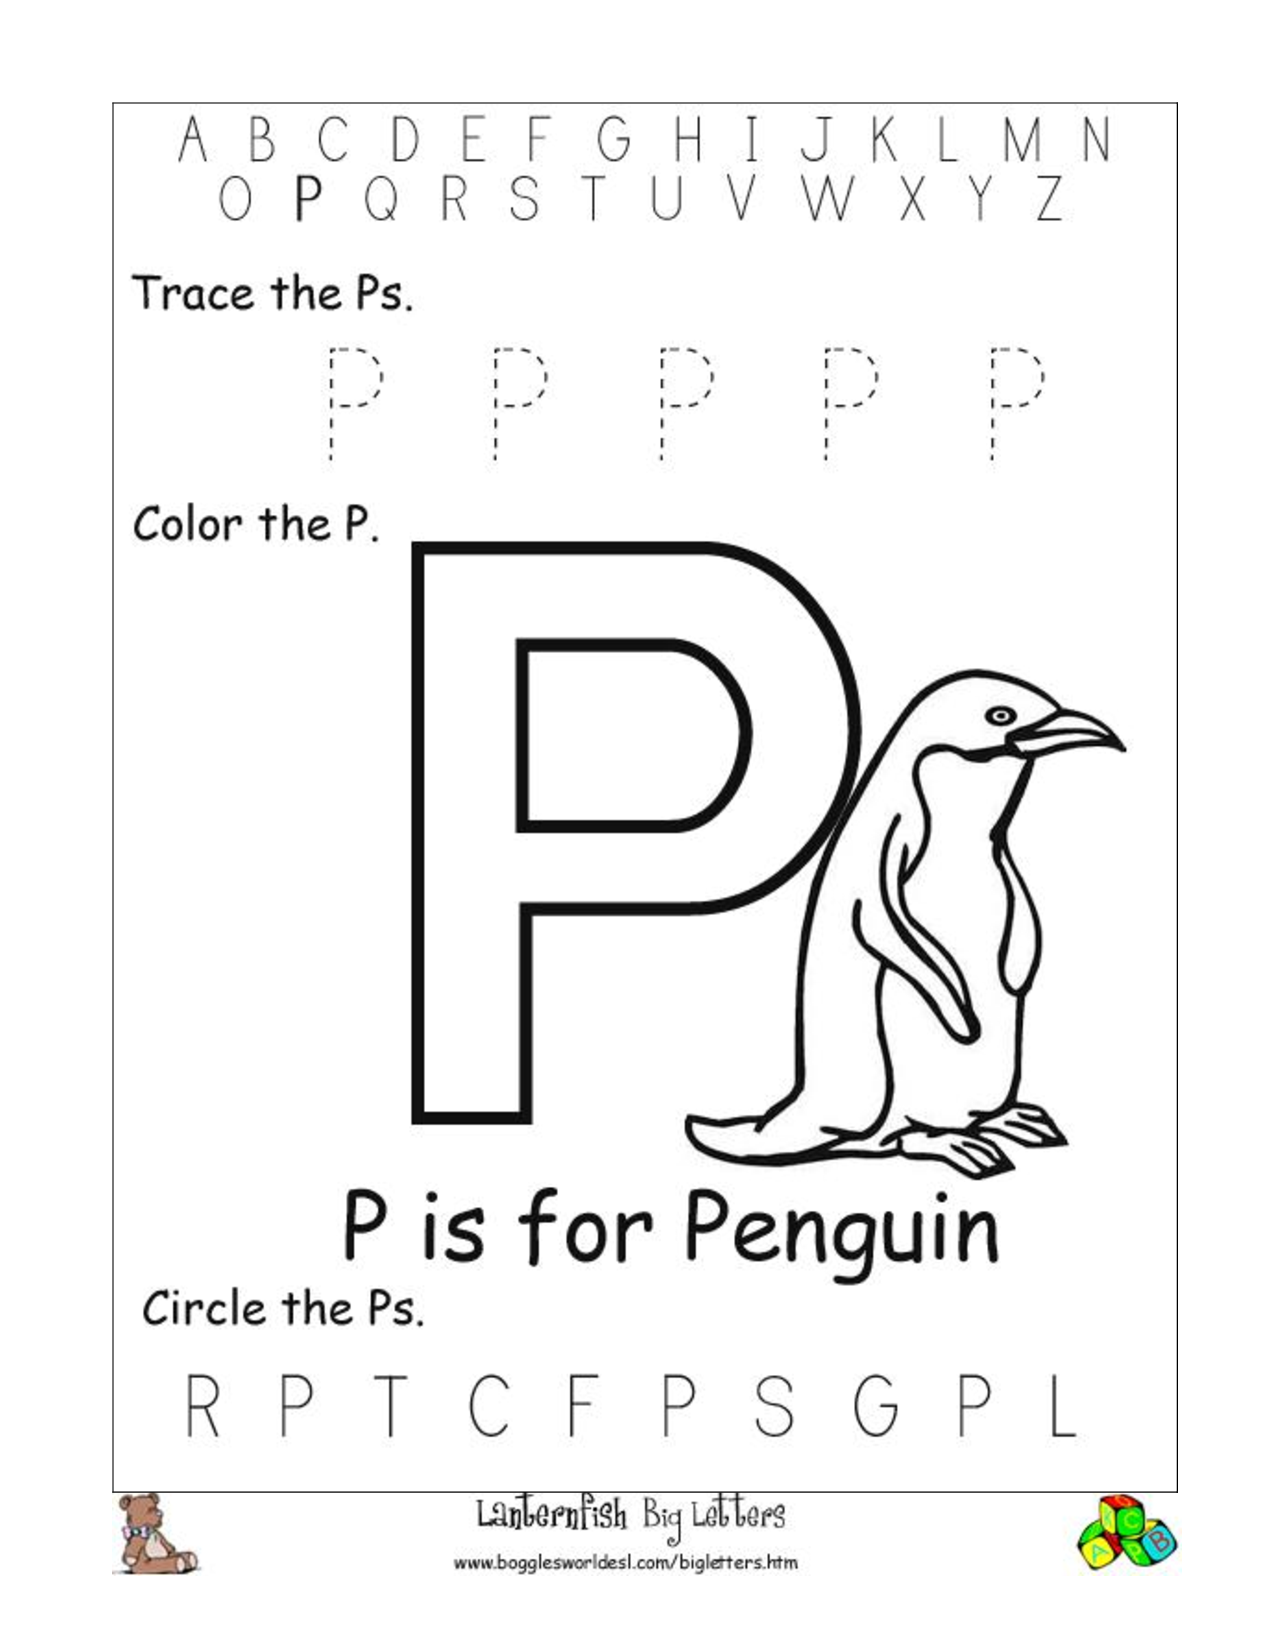 4-best-images-of-letter-p-printables-printable-letter-p-worksheets-preschool-printable-letter